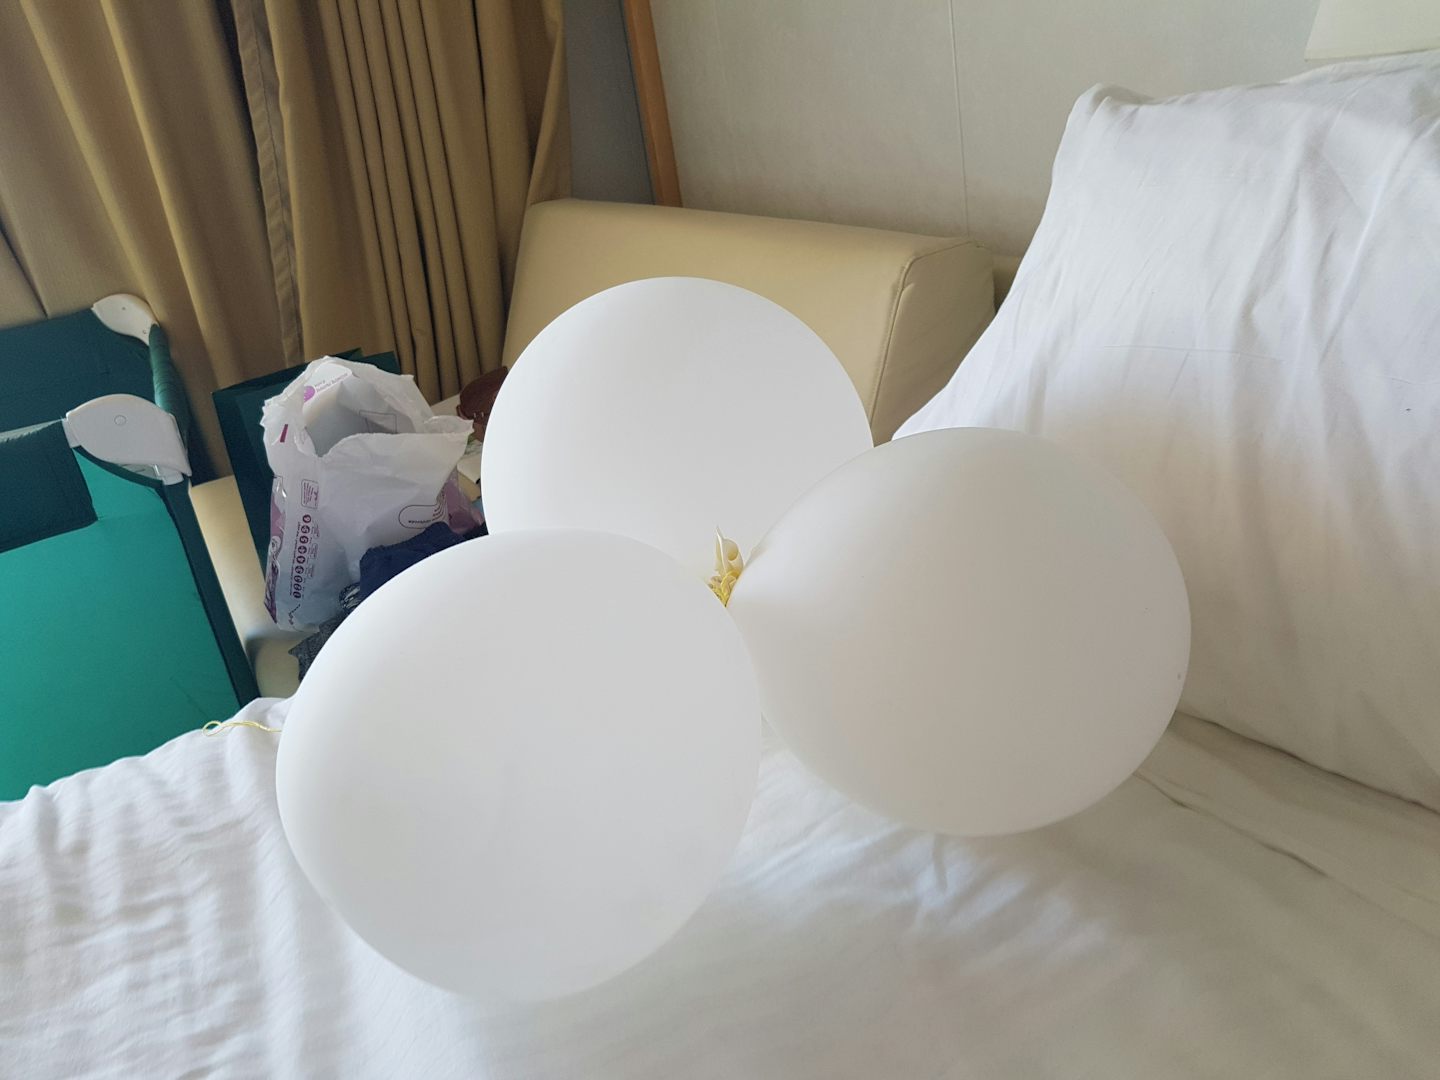 3 inflated balloons found under the bed from previous occupants